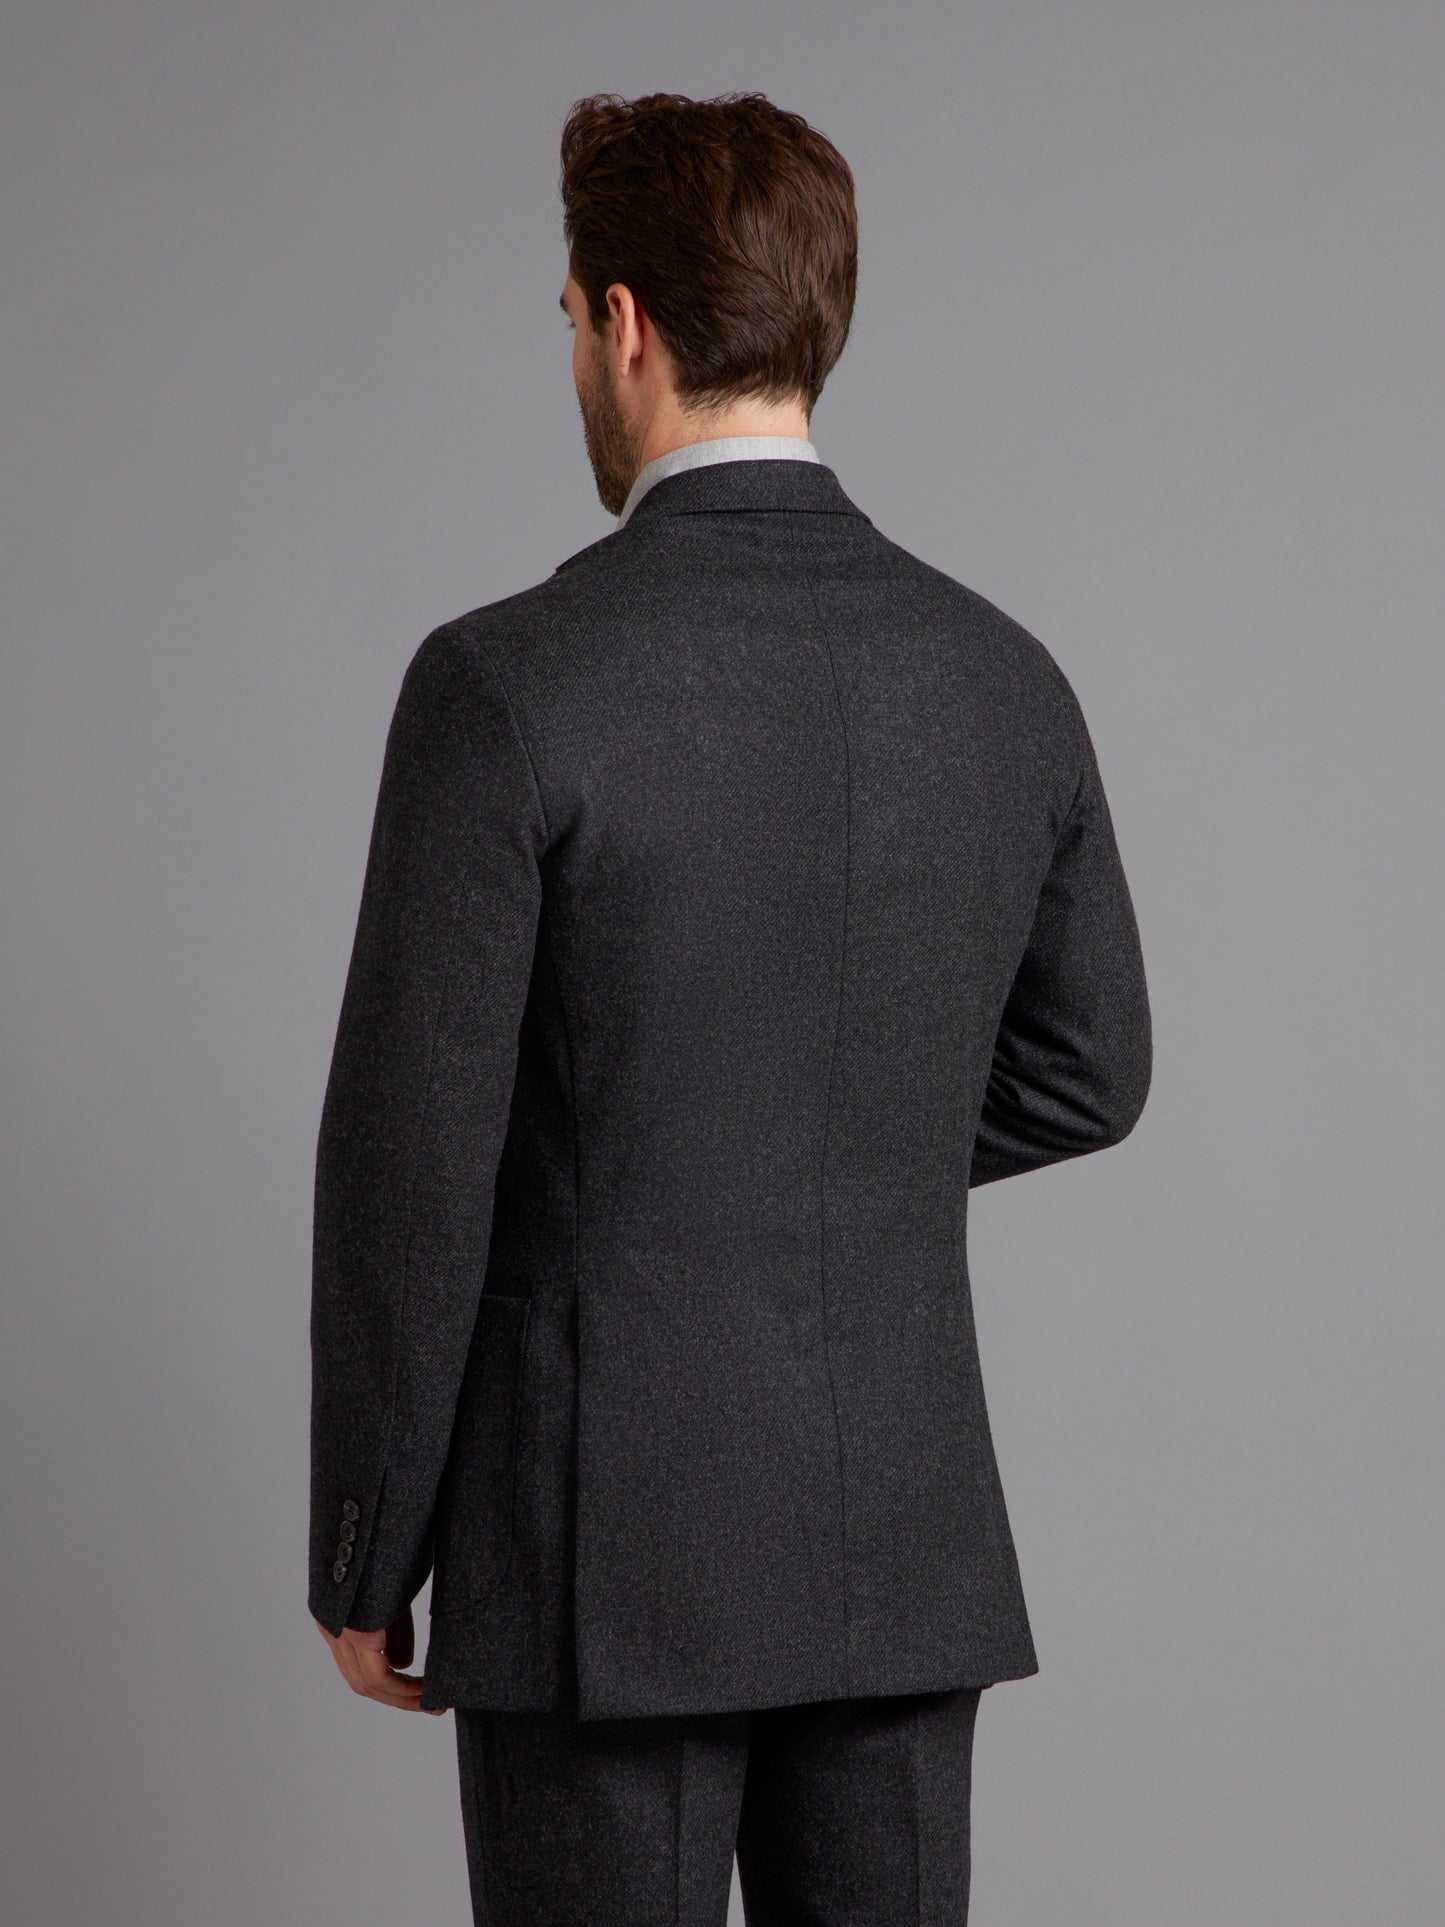 Unstructured Wool Jacket - Charcoal